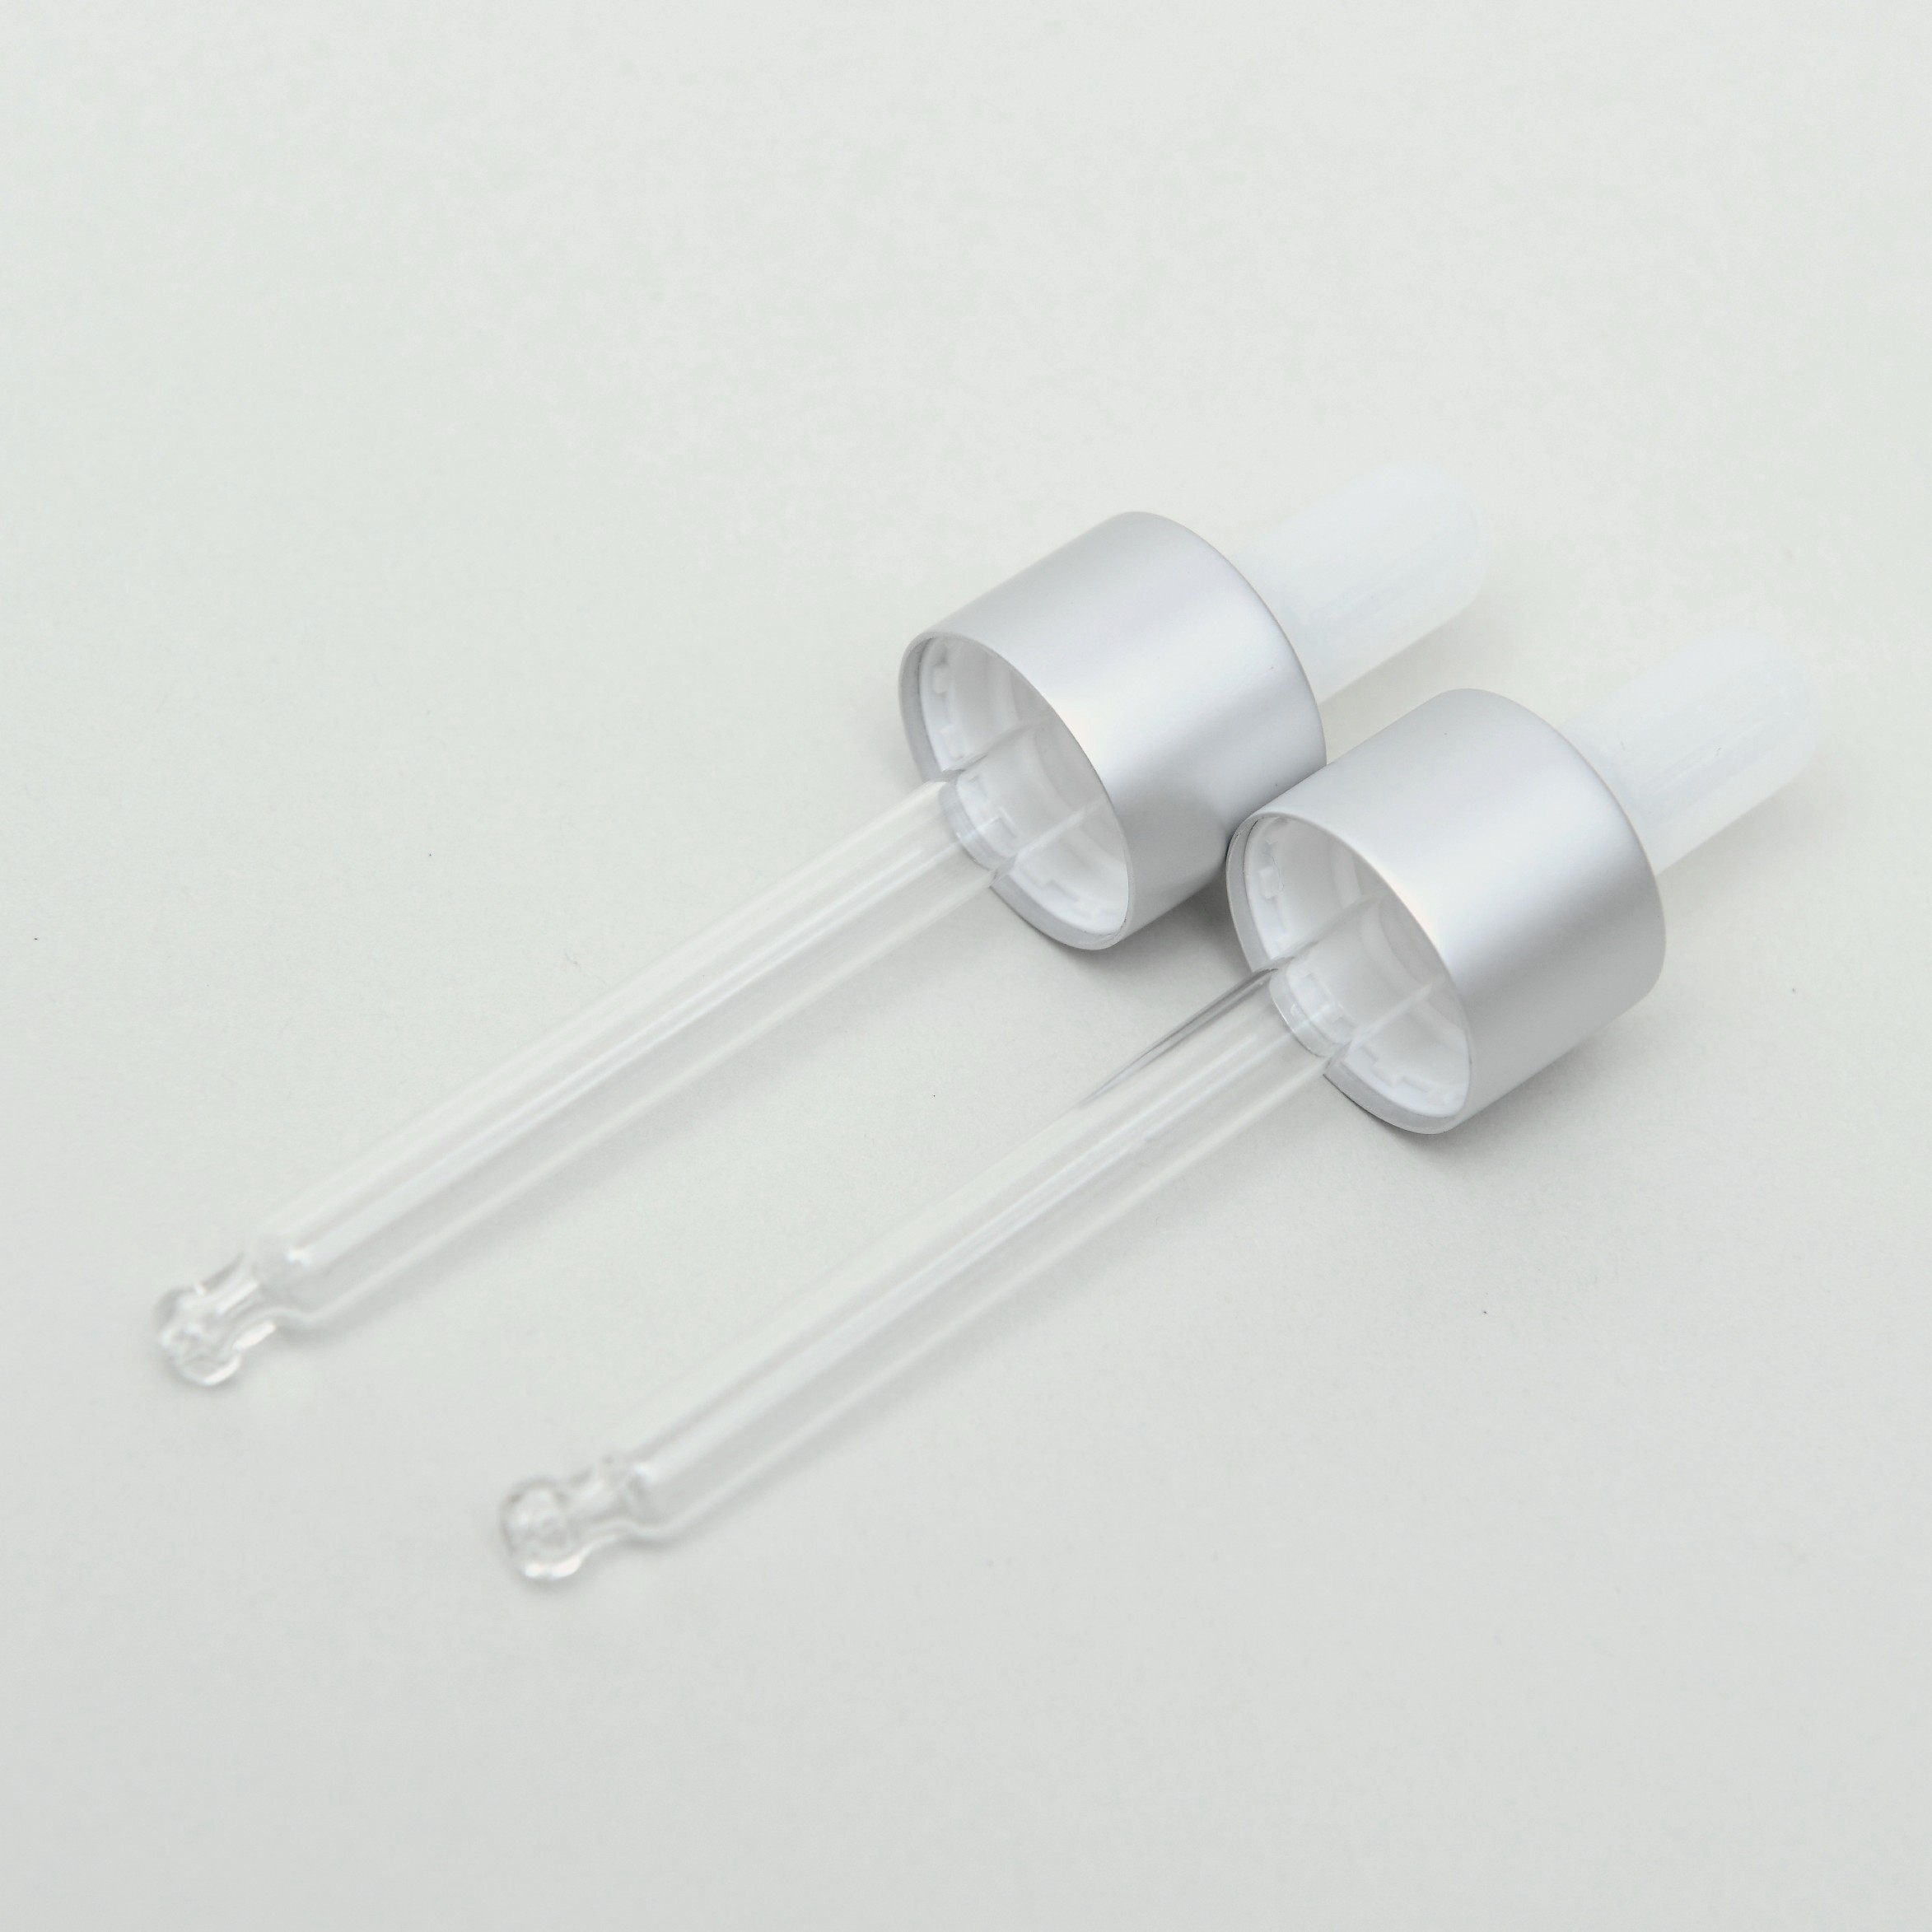 Glass pipette with ivory white teat and silver closure